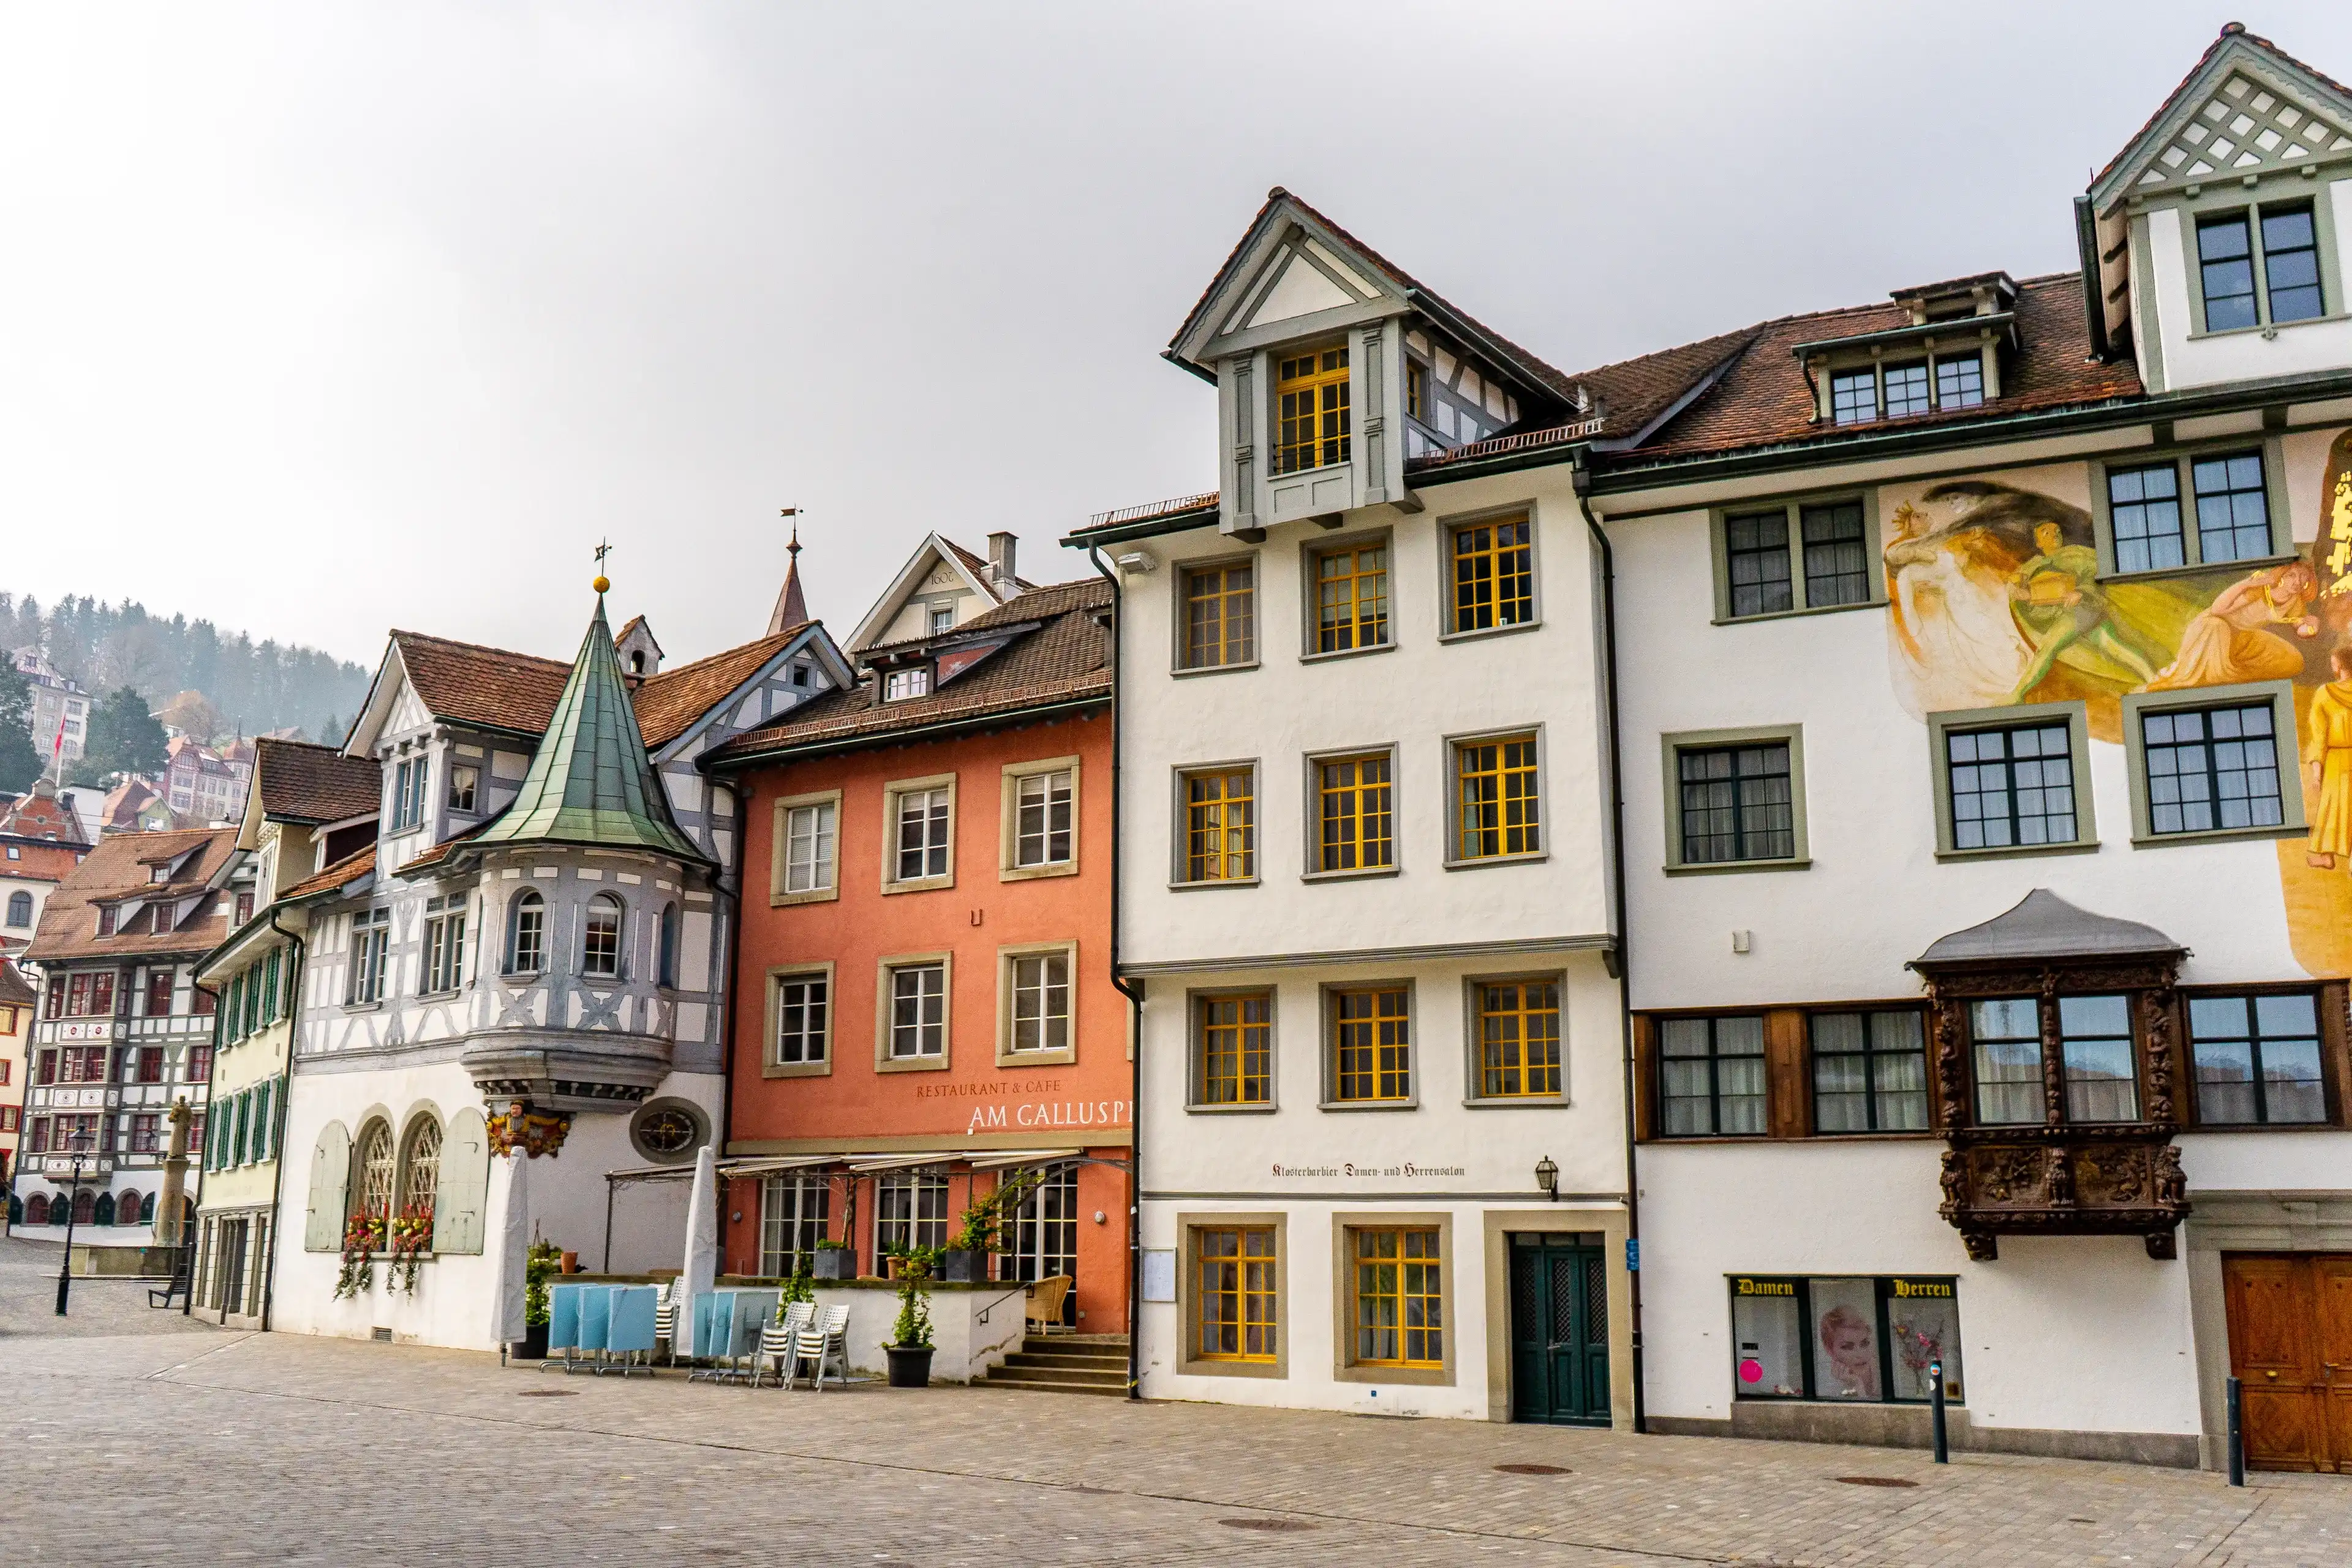 St. Gall hotels. Best hotels in St. Gall, Switzerland